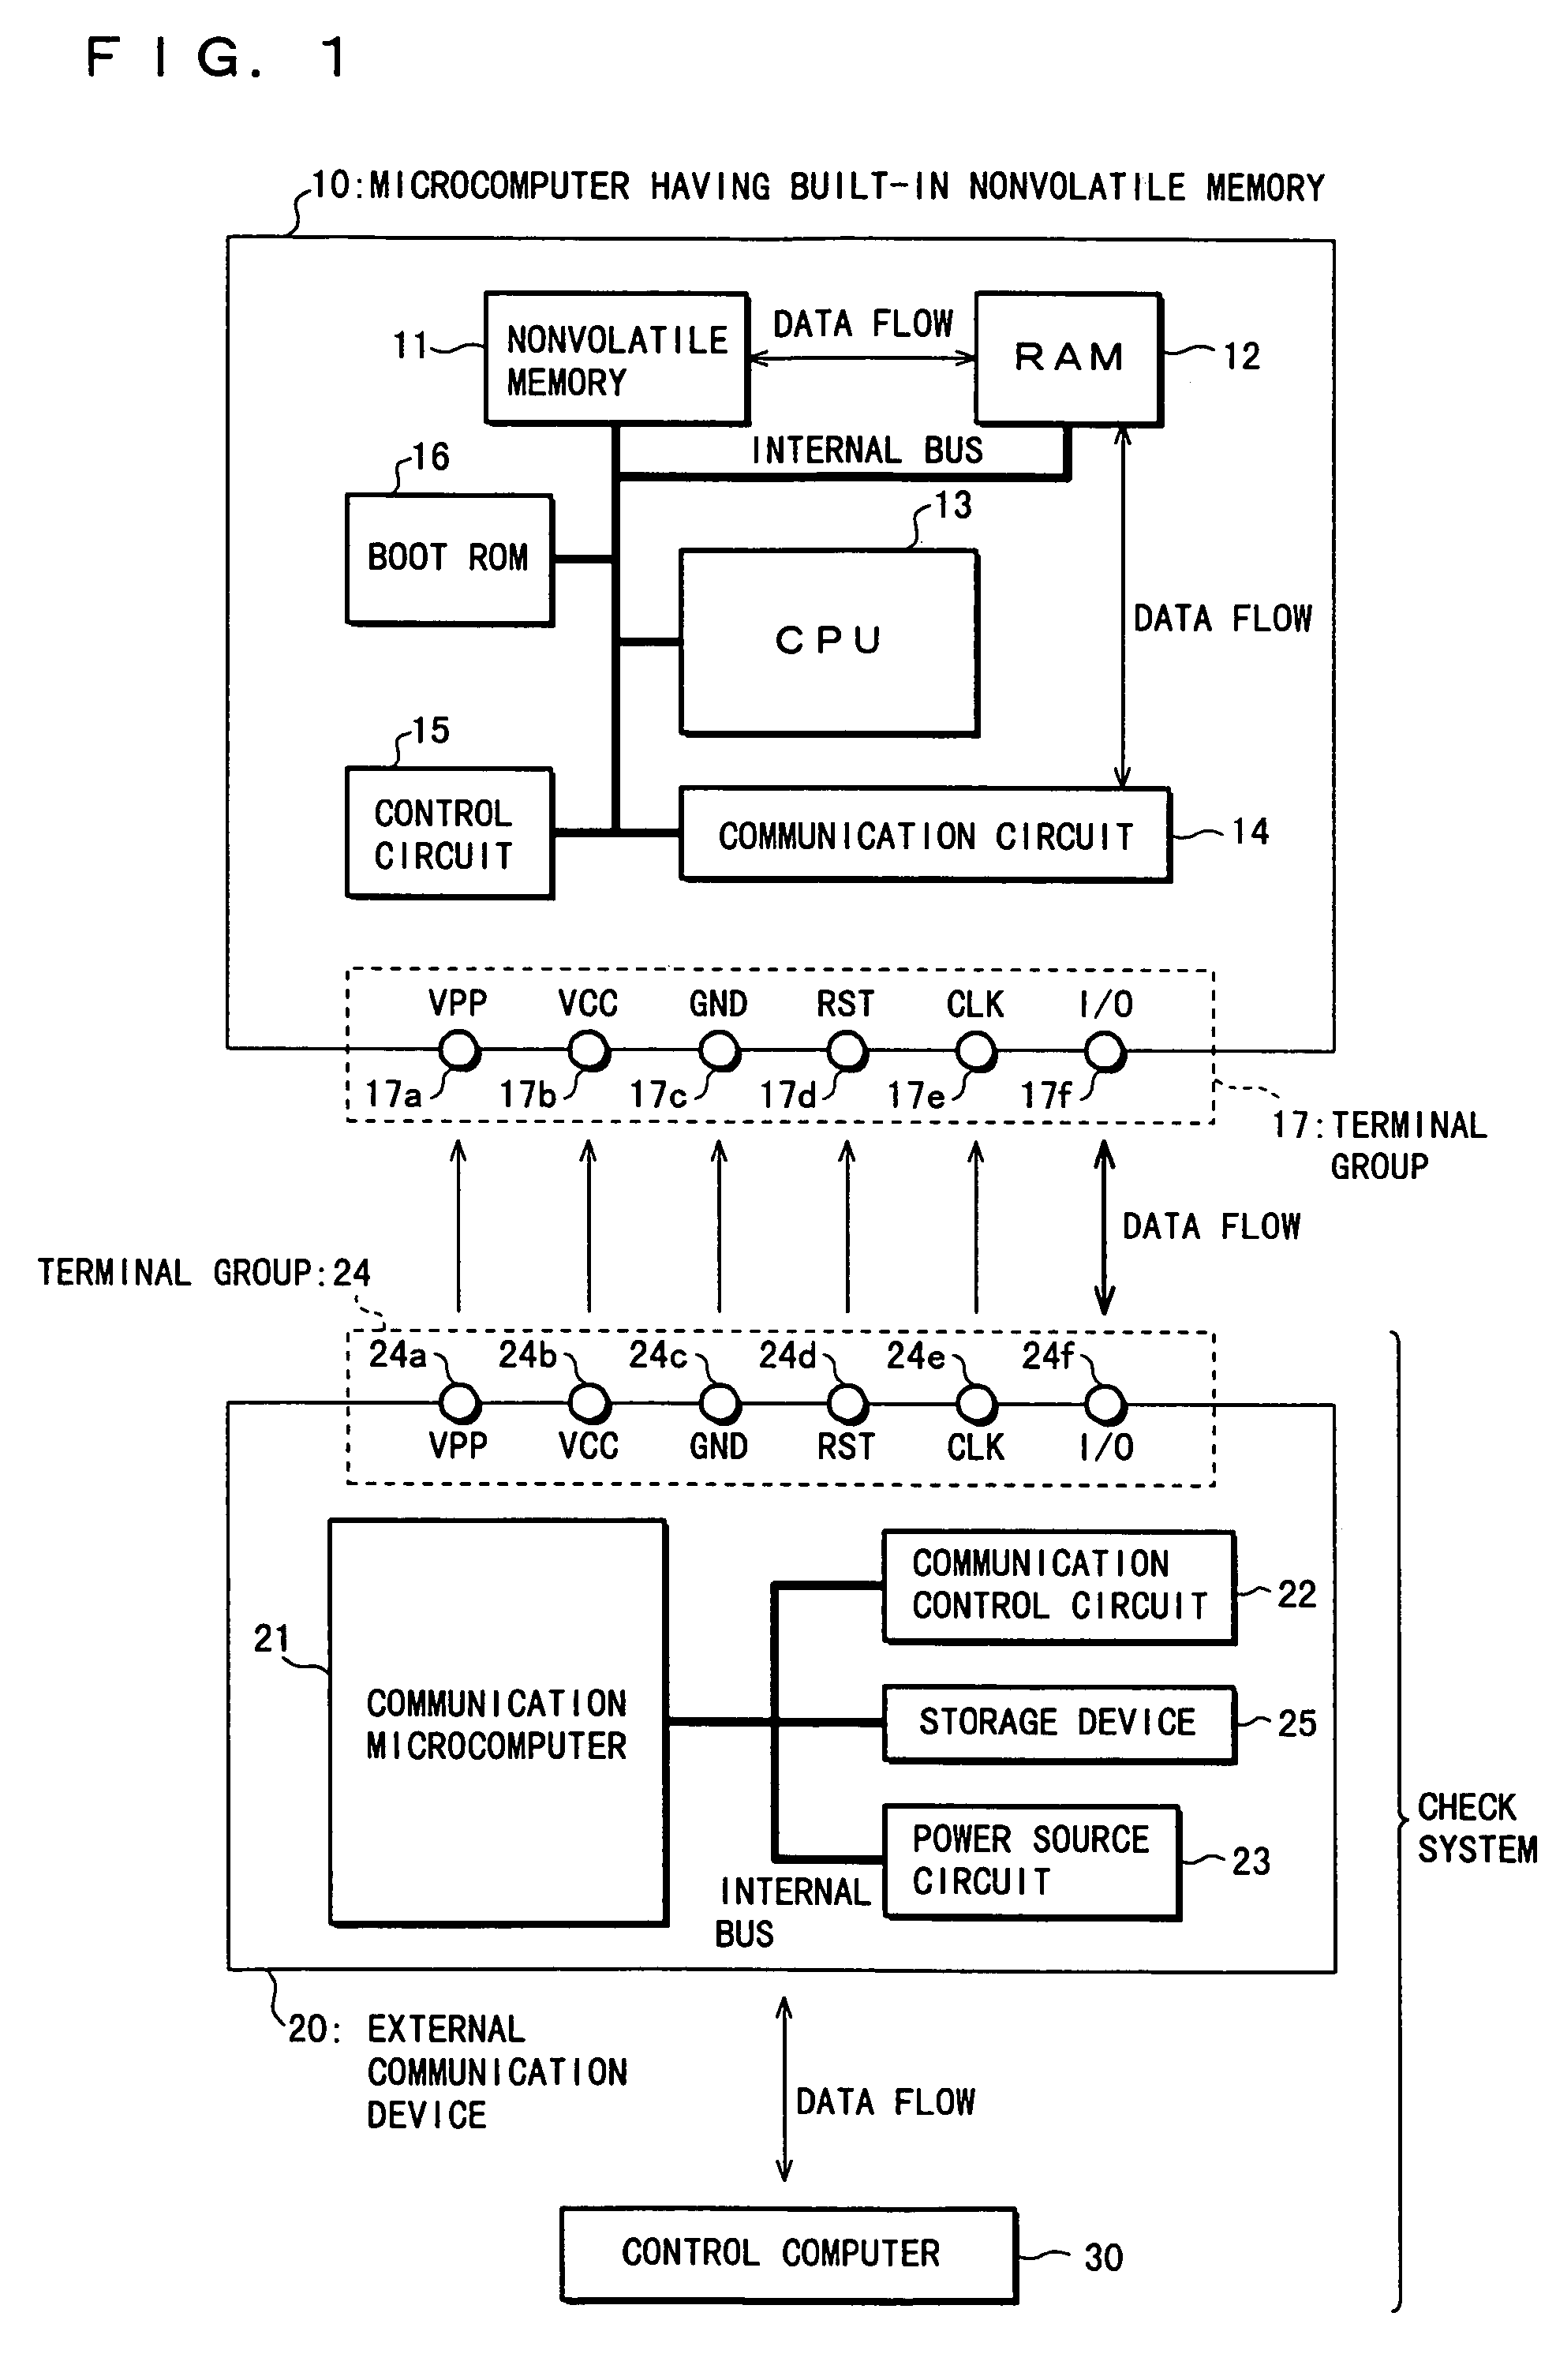 Microcomputer having built-in nonvolatile memory and check system thereof and IC card packing microcomputer having built-in nonvolatile memory and check system thereof